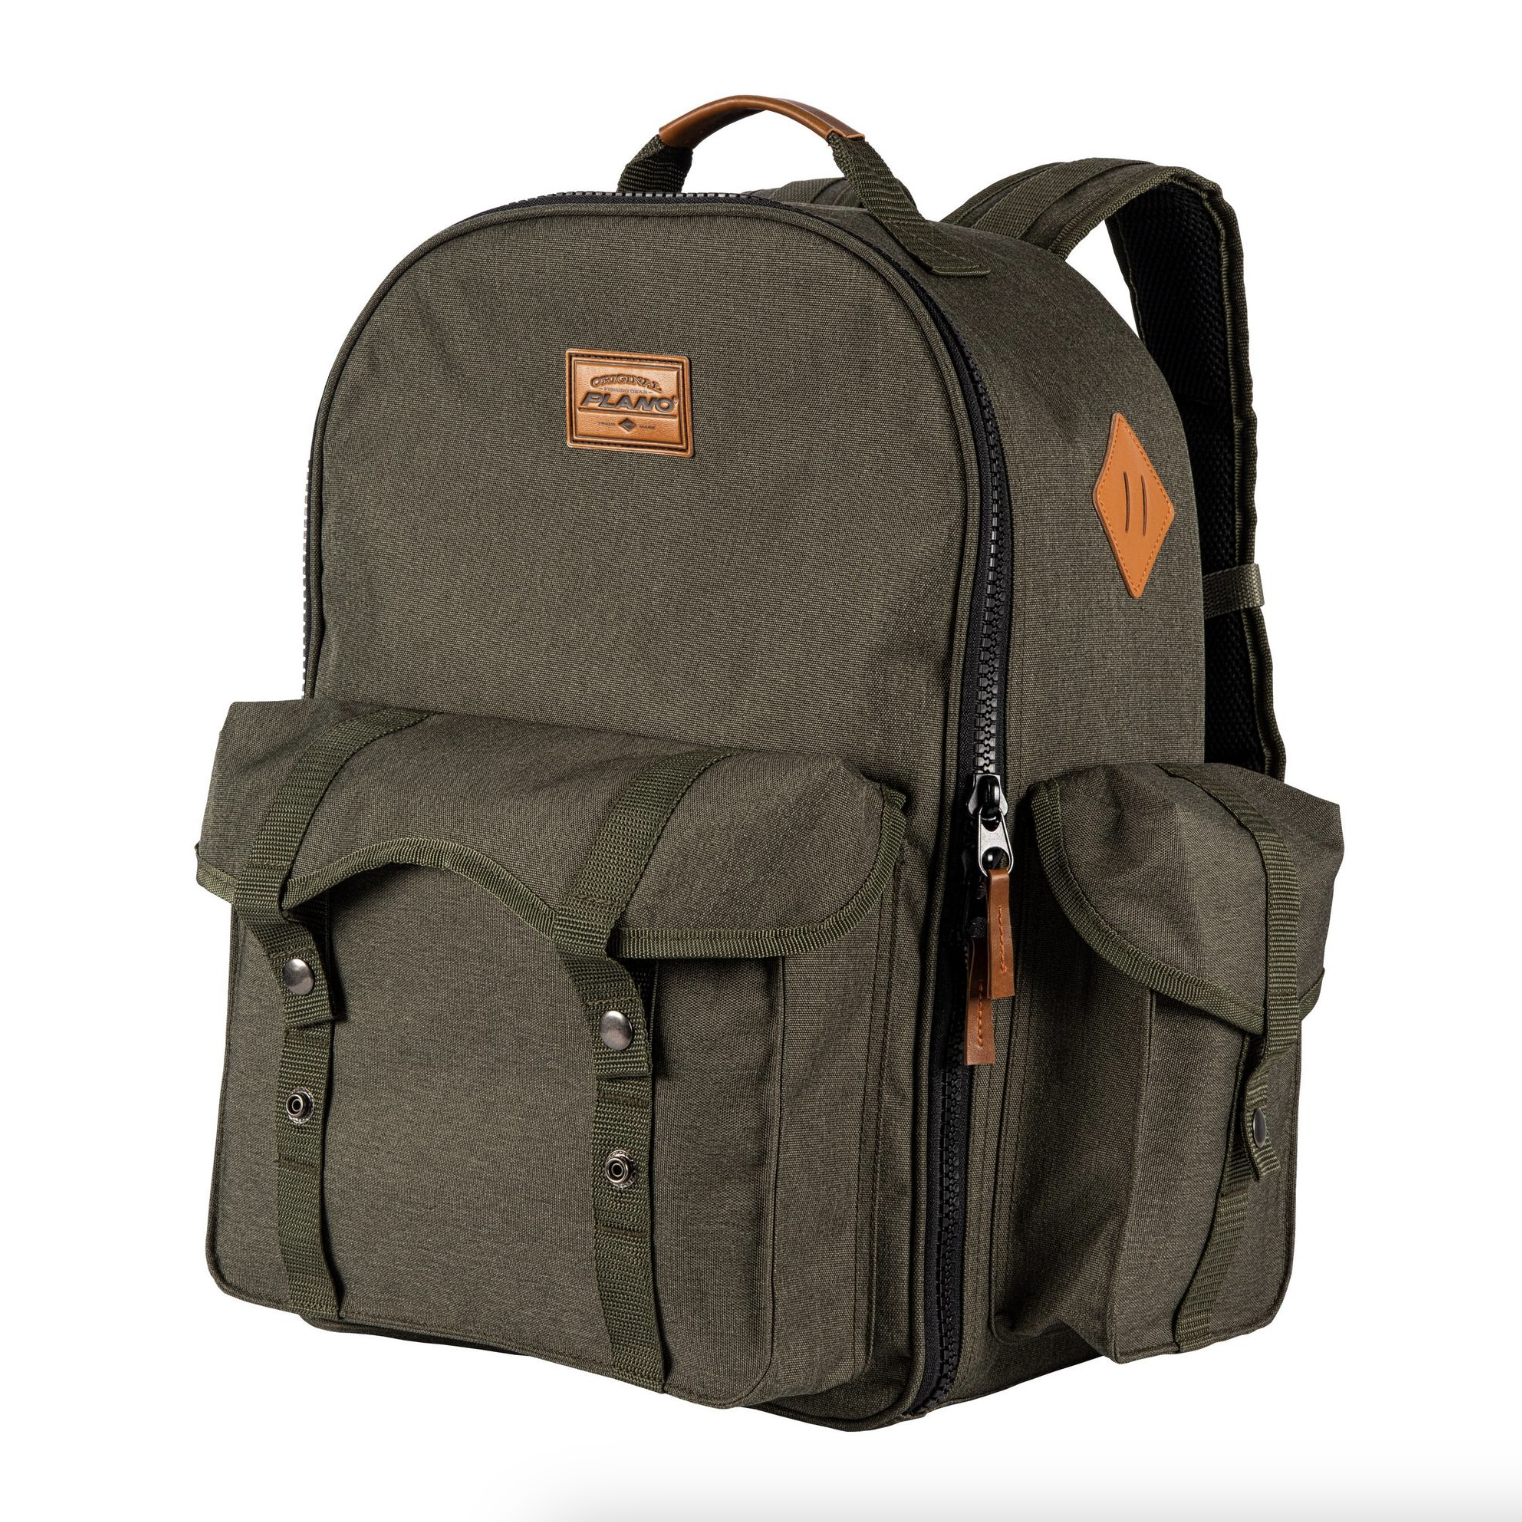 Plano Molding A-Series 2.0 Tackle Backpack, Includes Five 3600 Stows